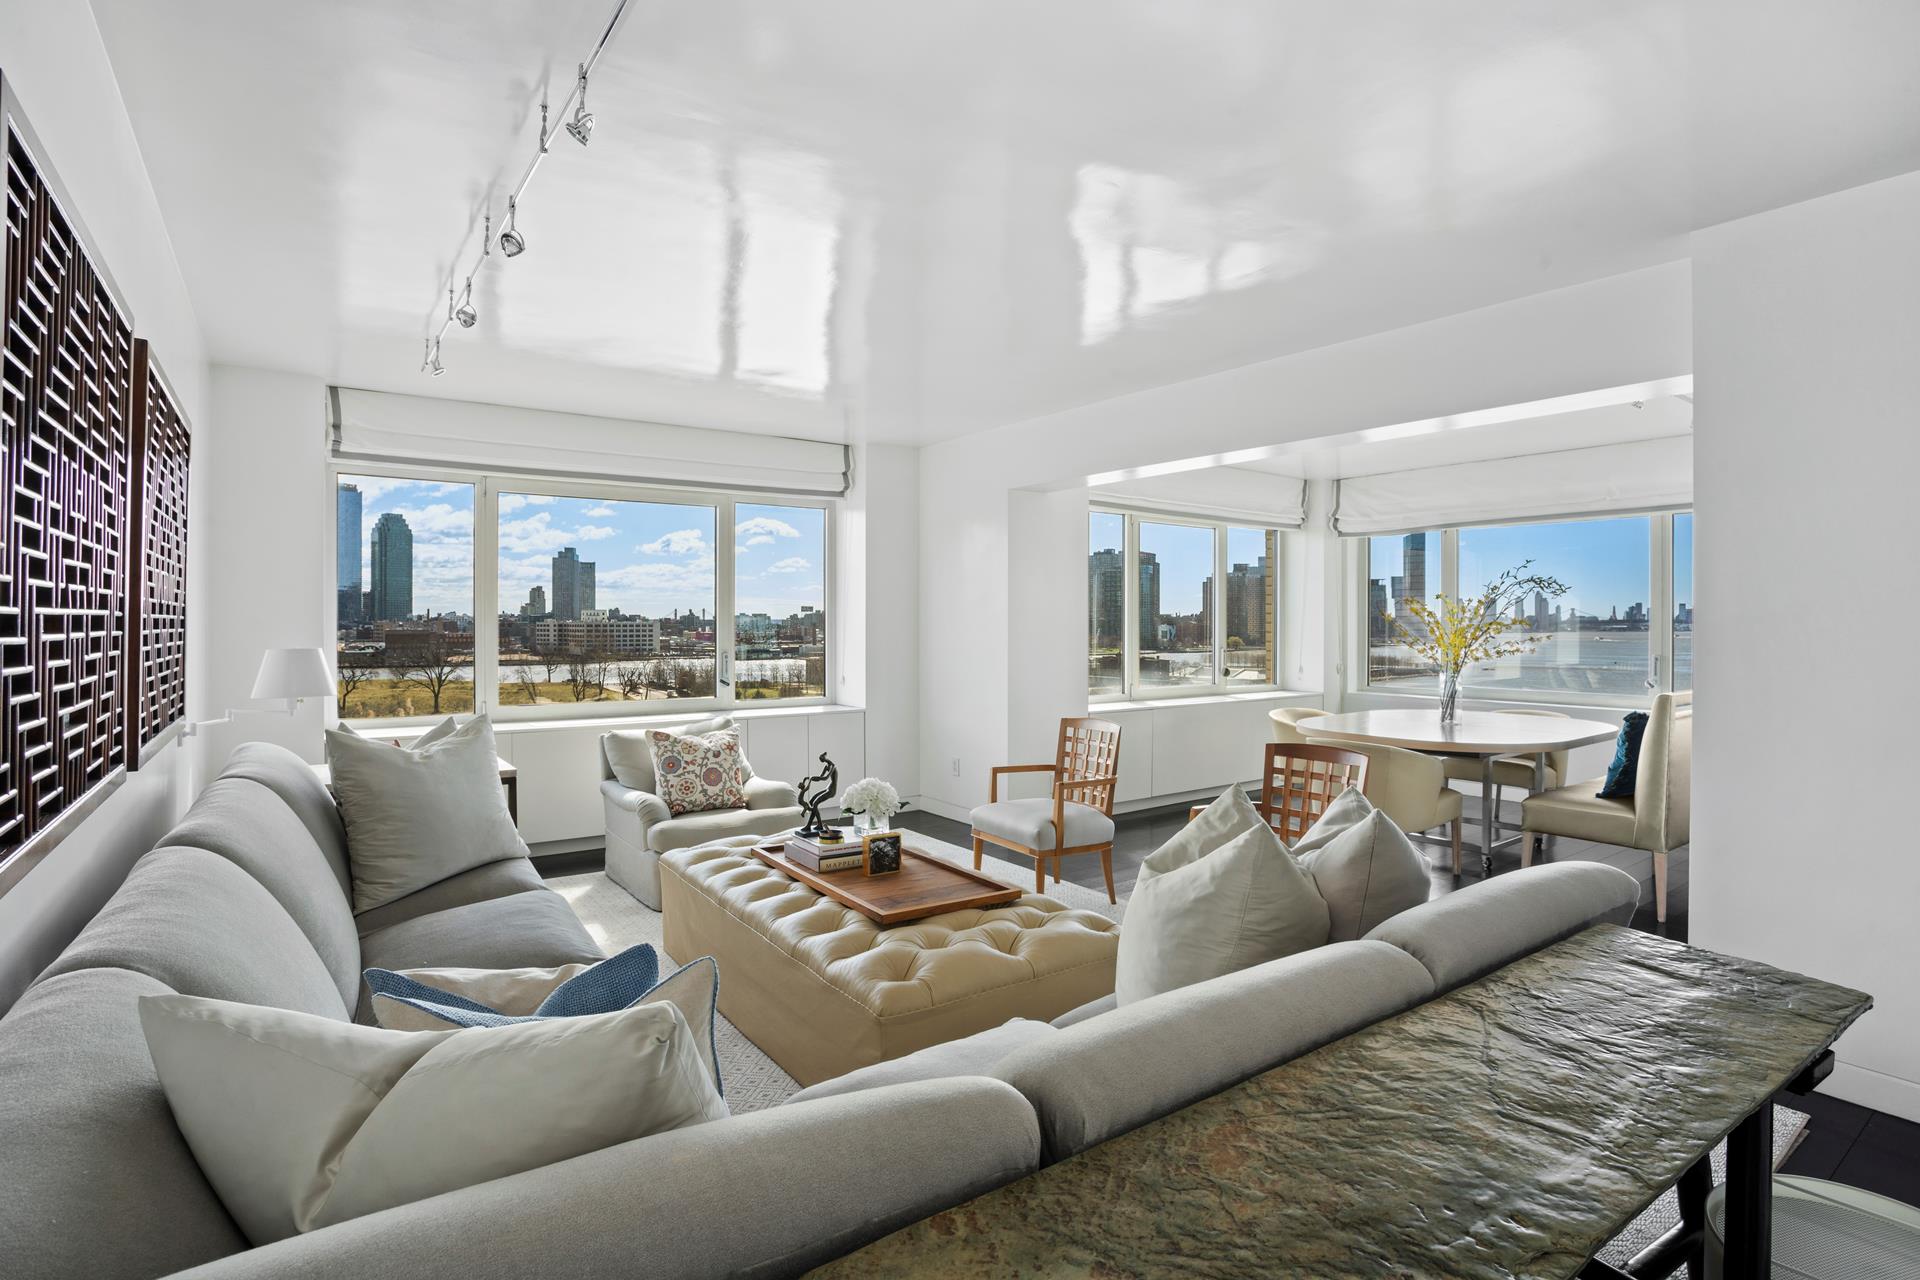 45 Sutton Place 9F, Sutton, Midtown East, NYC - 3 Bedrooms  
2.5 Bathrooms  
7 Rooms - 